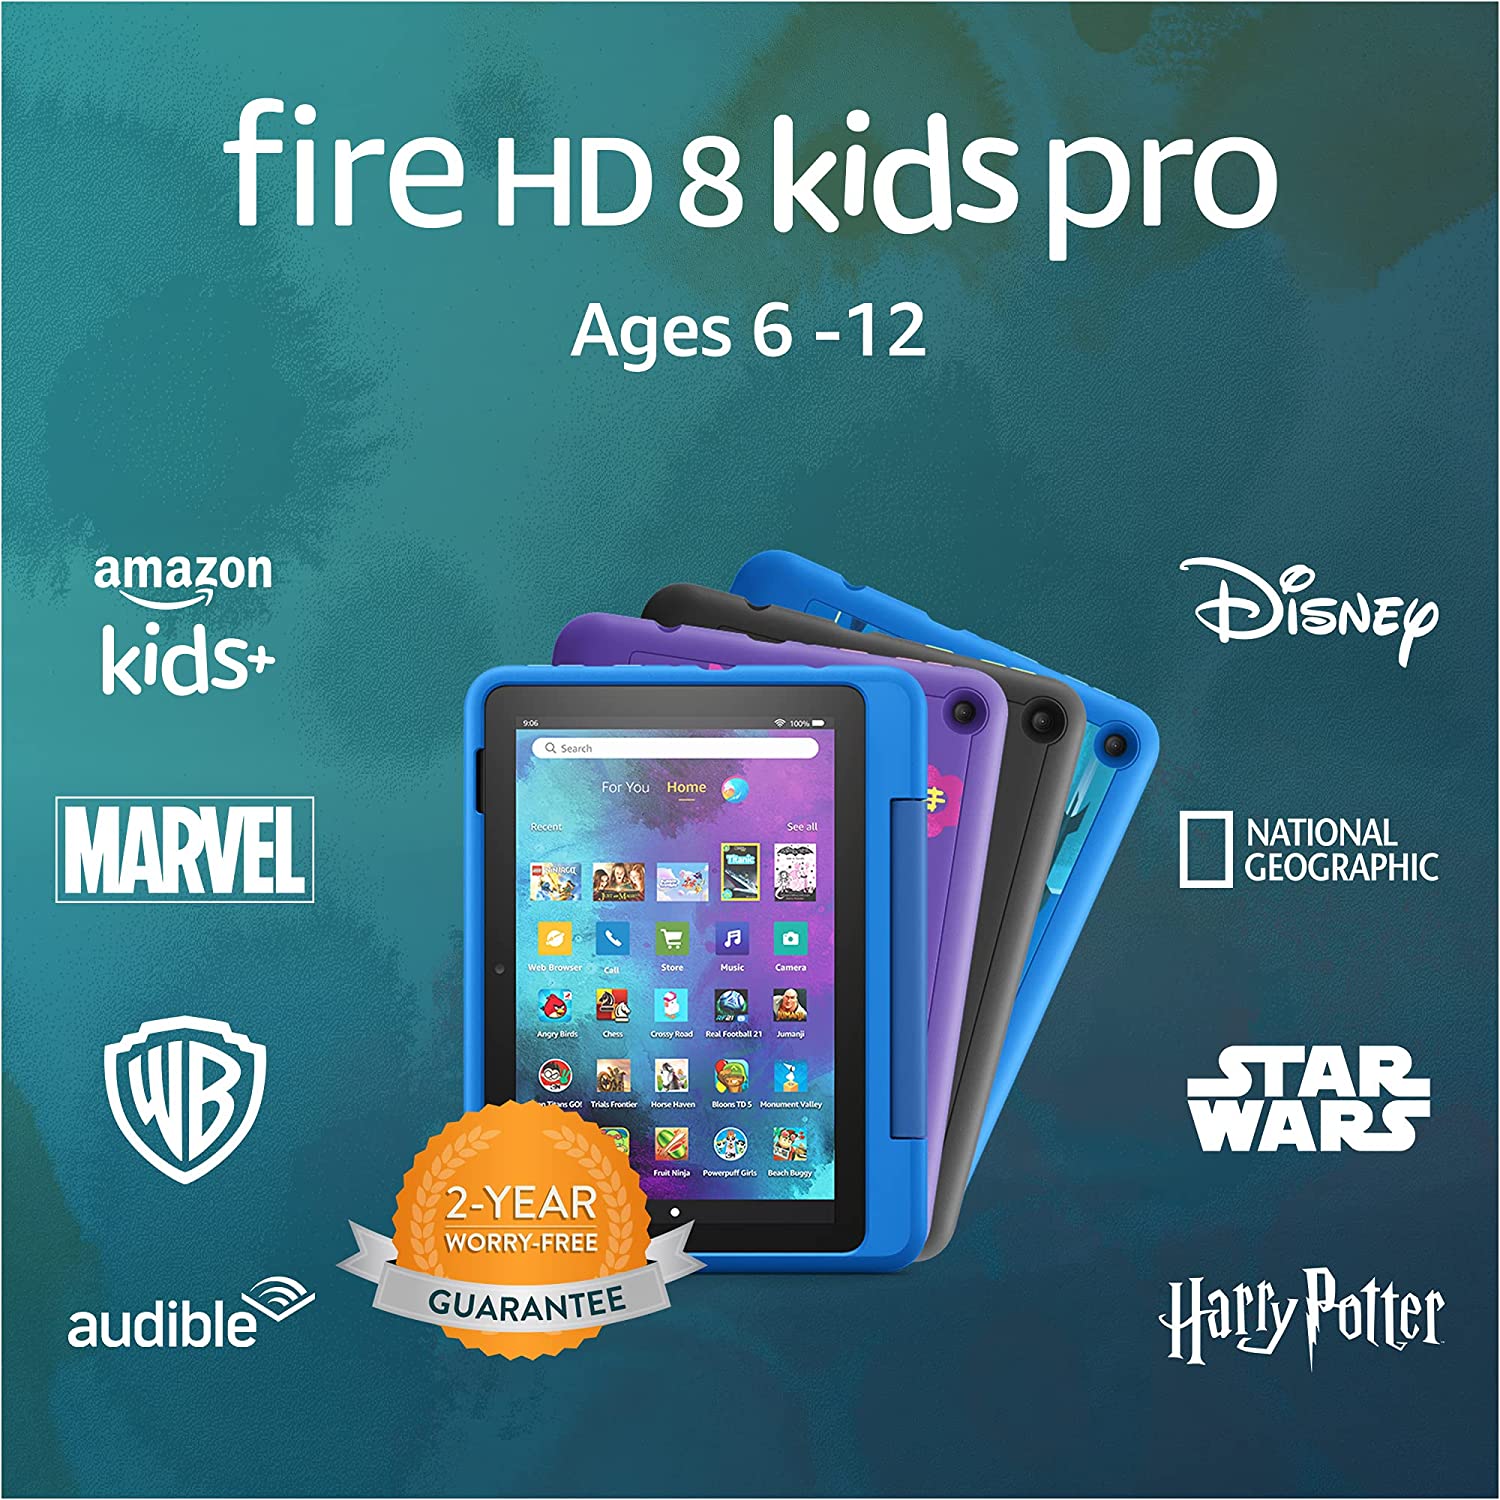 kid tablet, children's tablet, educational tablet, learning device, kids technology, child-friendly tablet, parental controls, pre-loaded apps, durable design, entertainment for kids